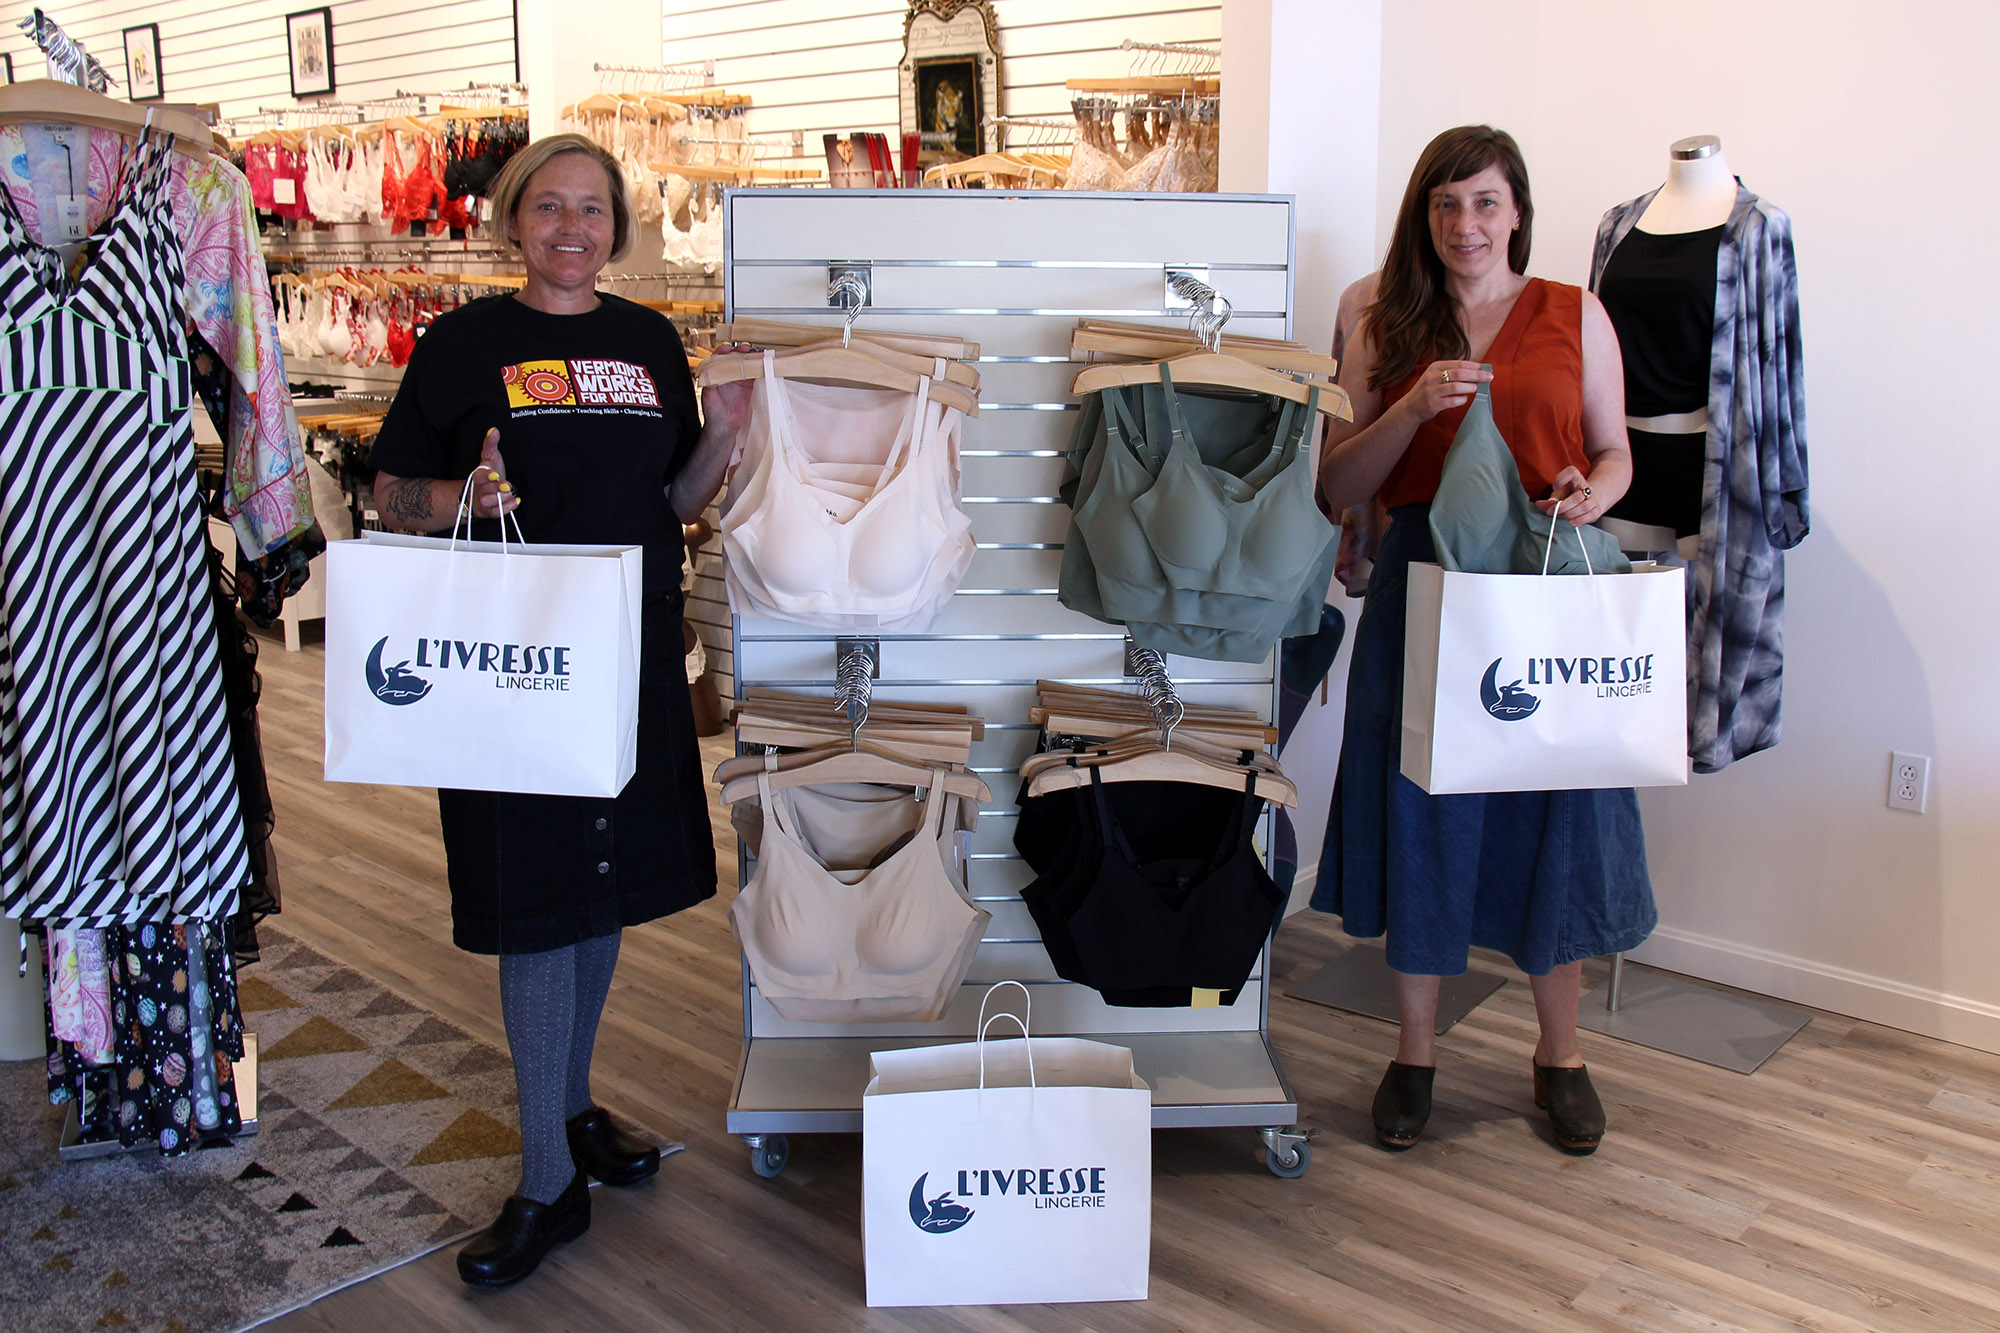 Vermont Works for Women Program Manager Heather Newcomb poses for a photo with L'ivresse Lingerie owner who collects and donates bags of bras for incarcerated women.